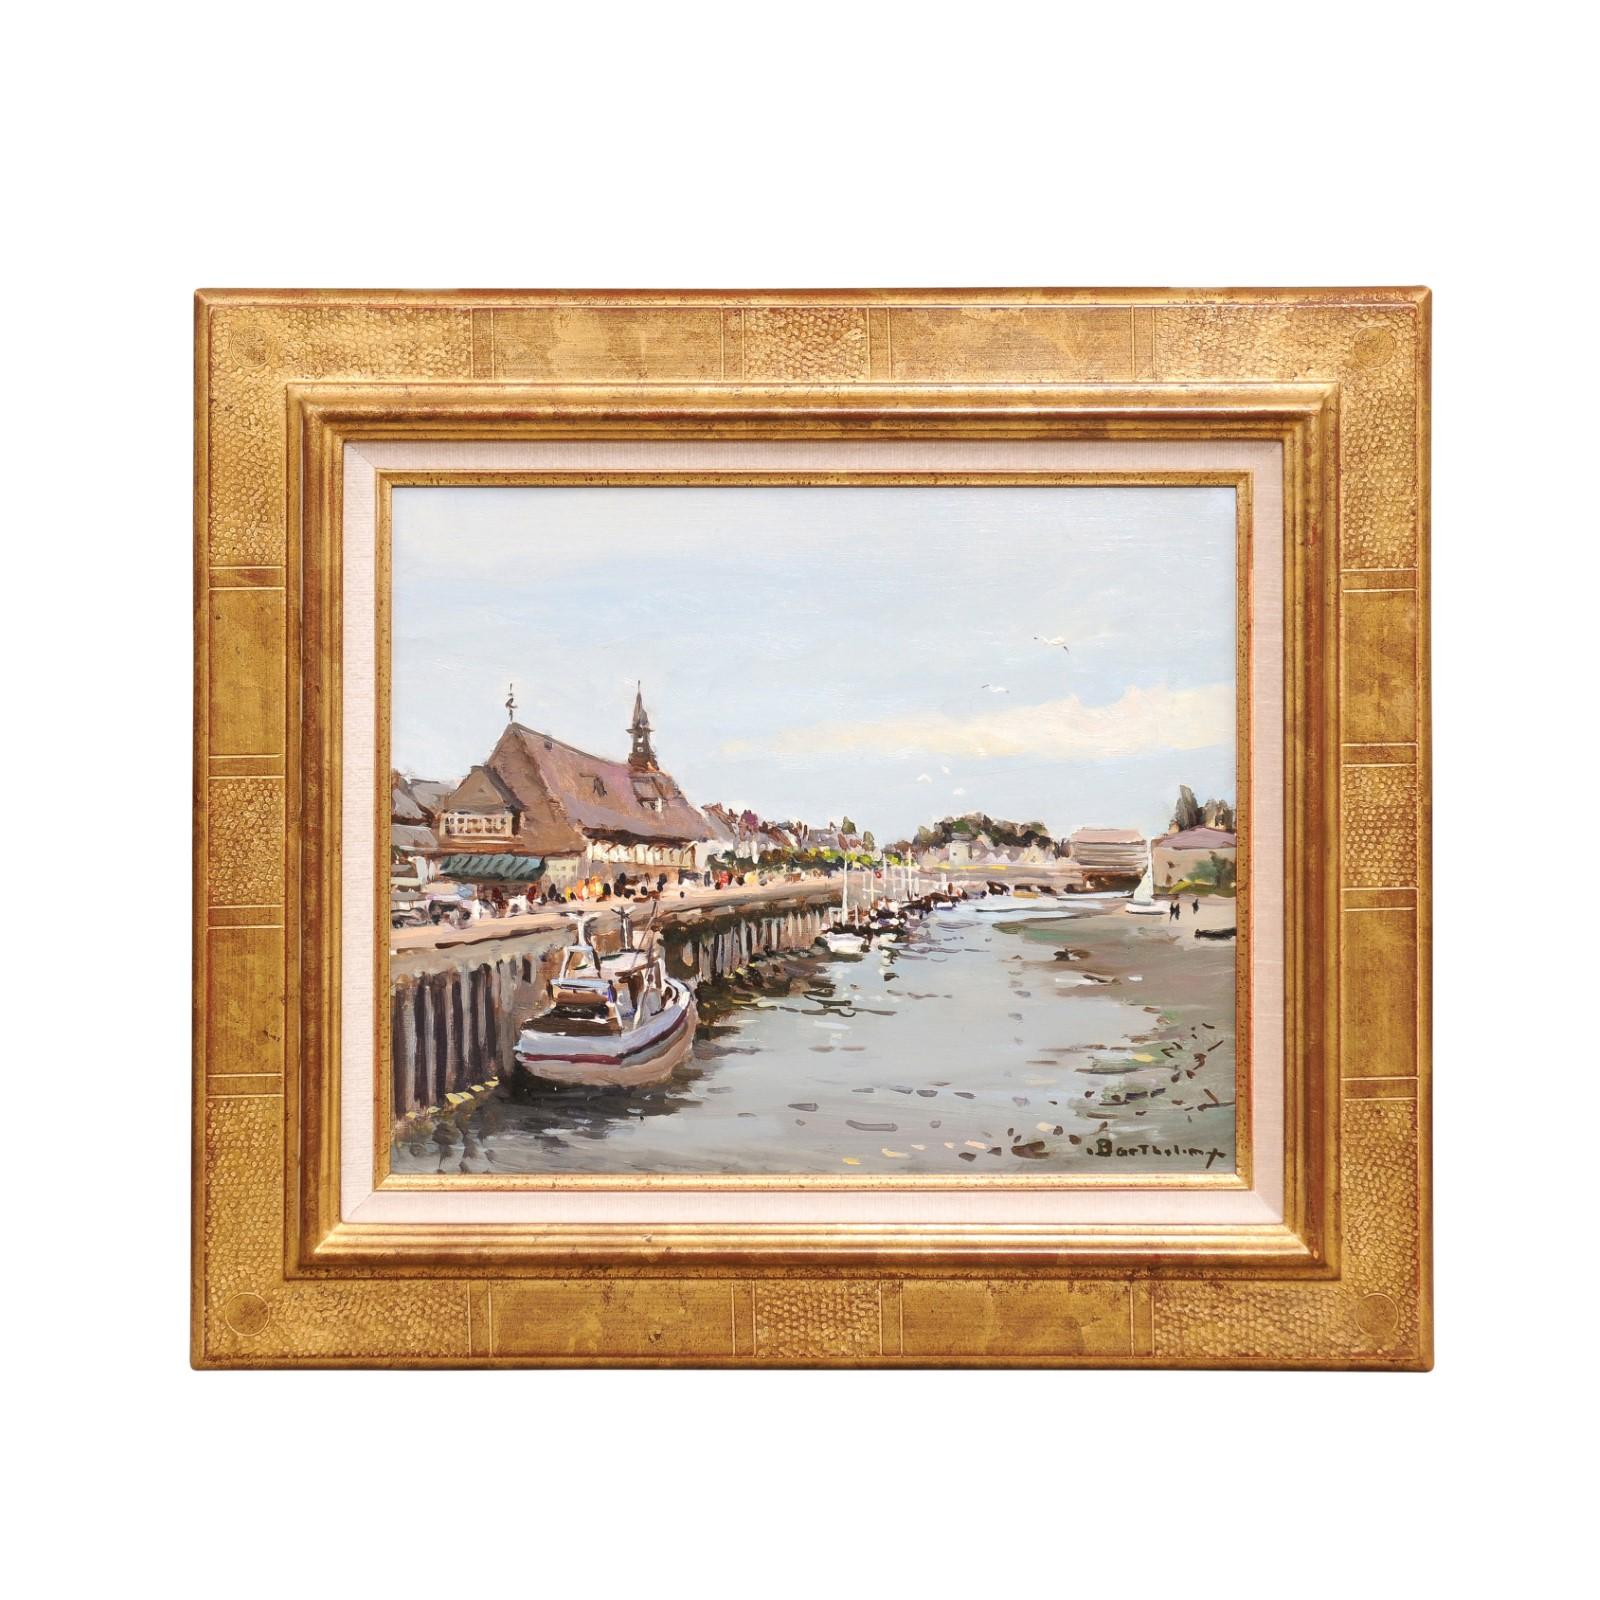 A French framed oil on canvas harbor painting from the late 20th century, titled 'Le Port de Trouville sur Mer' by Gérard Barthélémy. Created during the last decade of the 20th century, this oil on canvas painting depicts the quiet harbor of